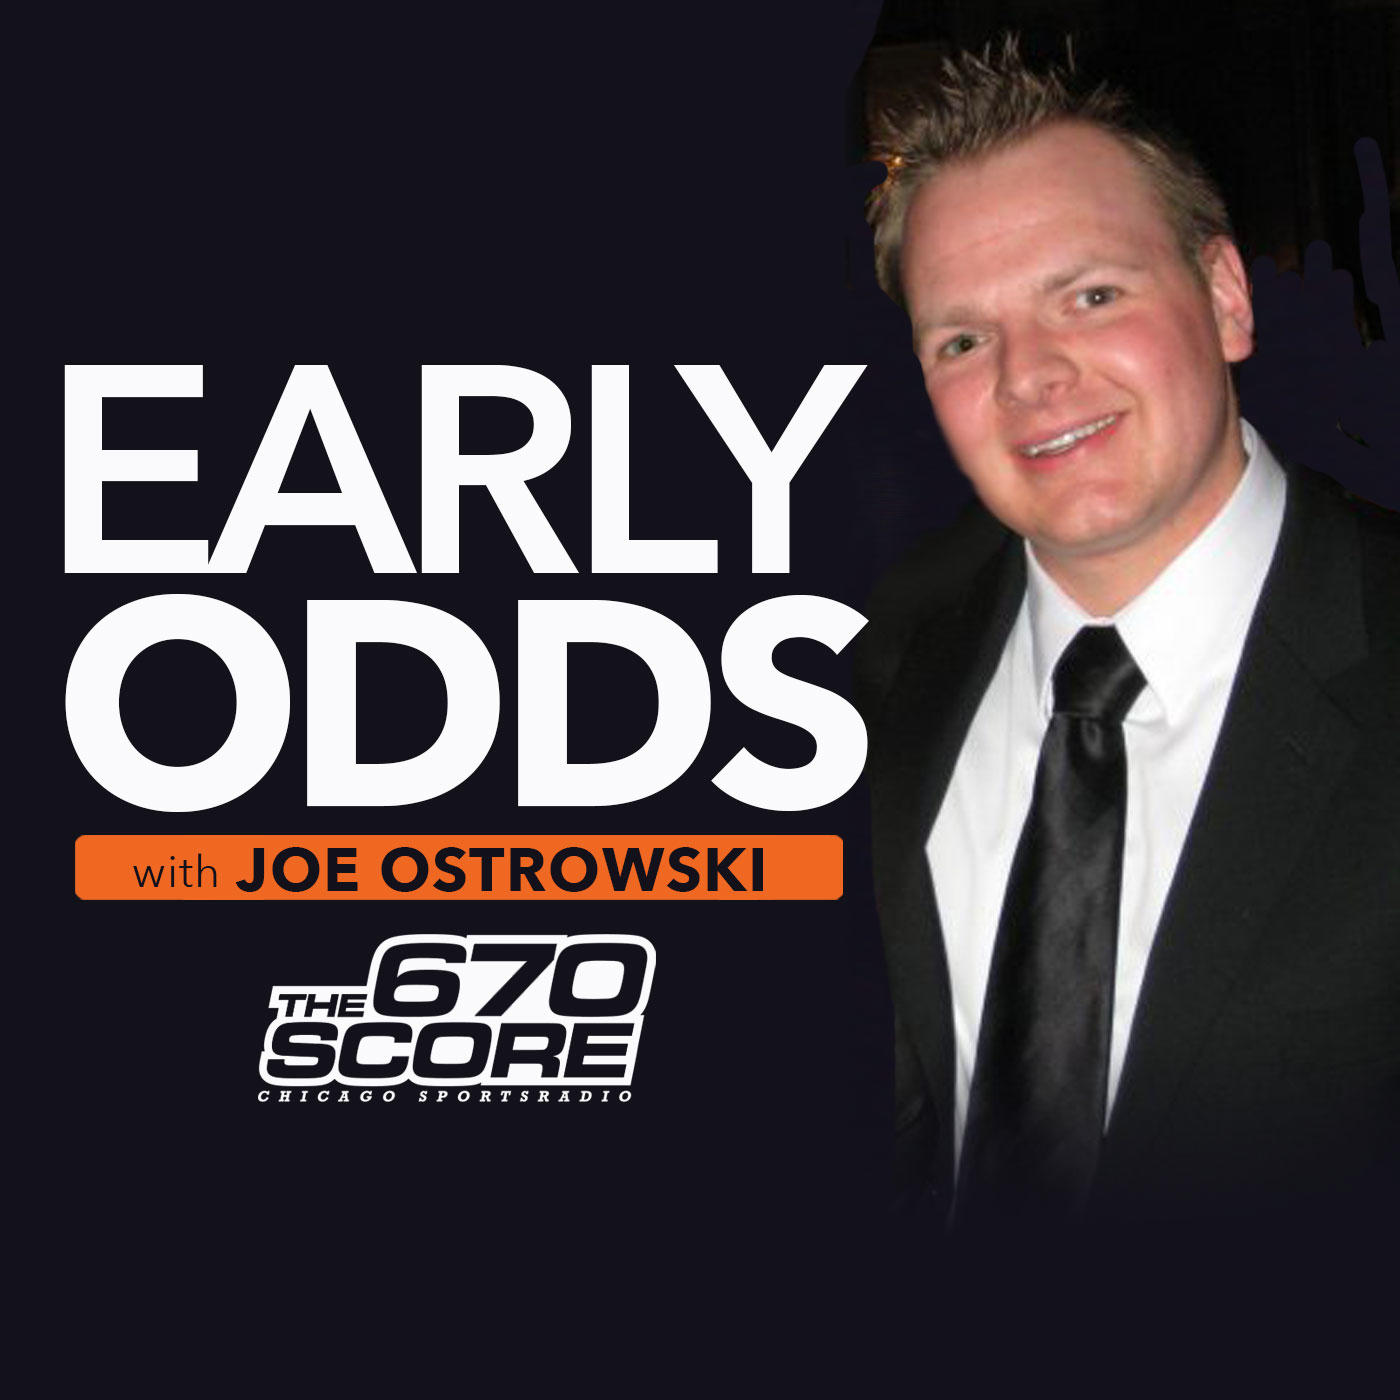 Early odds for NFL Offensive/Defensive Player of the Year after NFL Draft